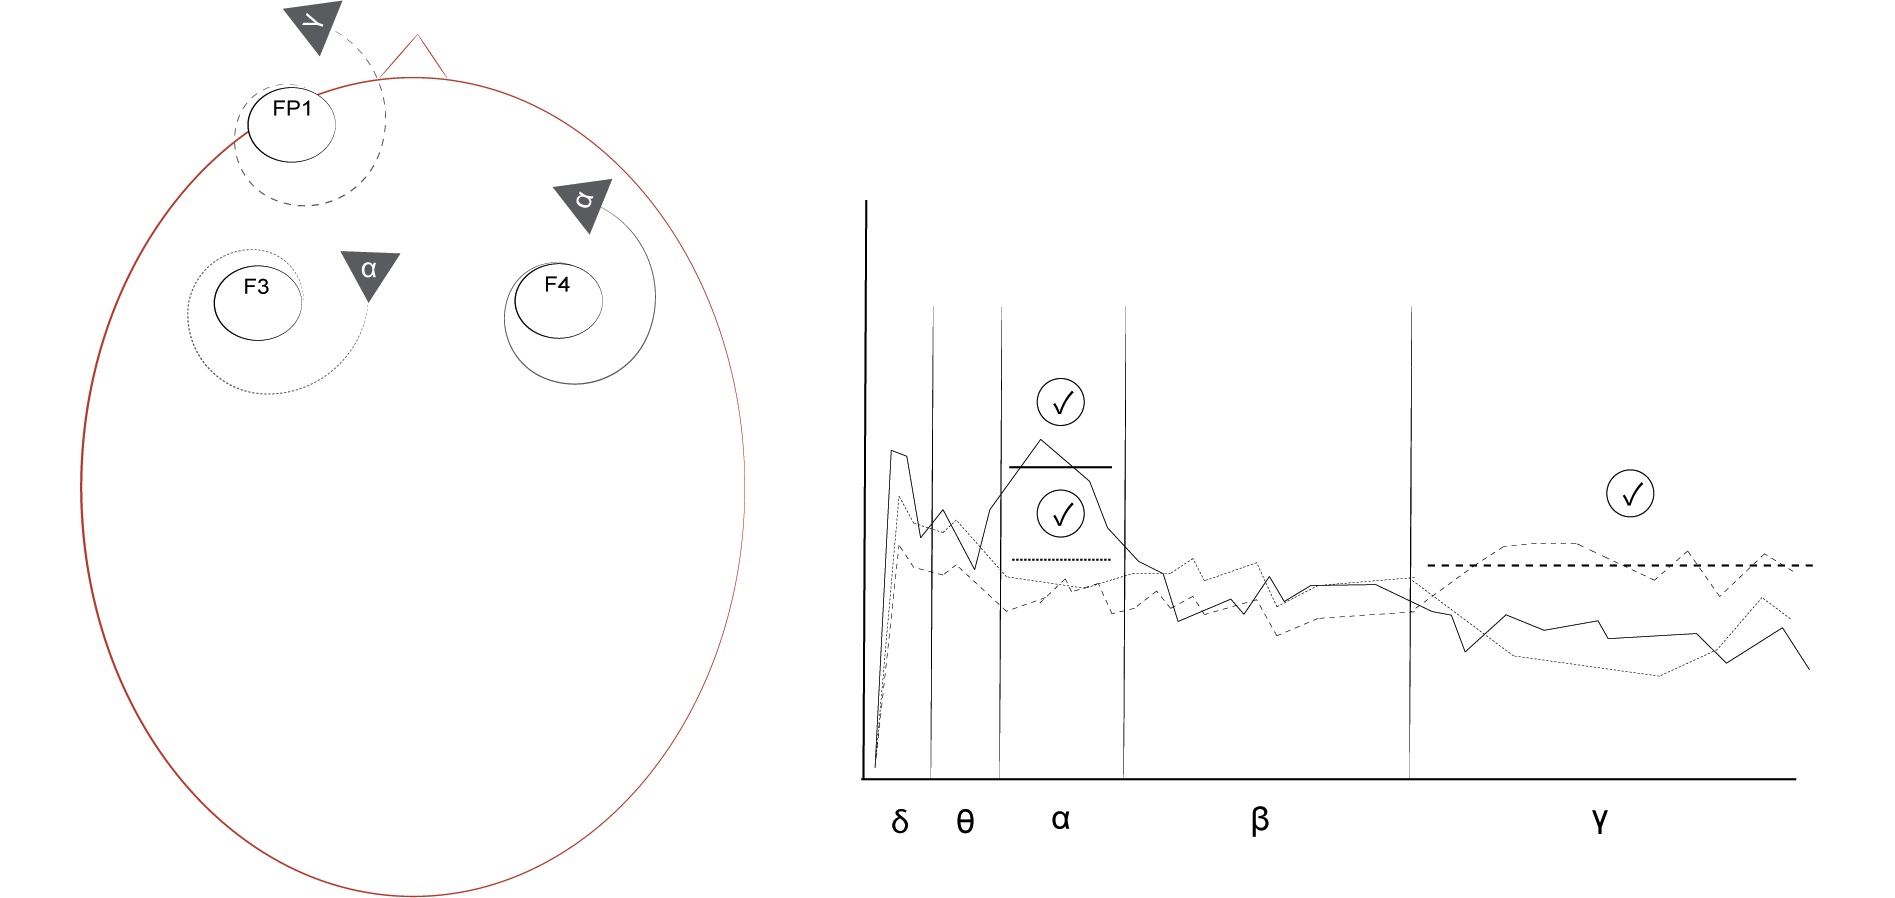 A open heart protocol's electrode location (left) and spectral plot (right) show the application of one indicator on the right hemisphere (F4) and one inhibitor on the left hemisphere (F4), with the addition of another indicator on FP1 rewarding increased gamma.